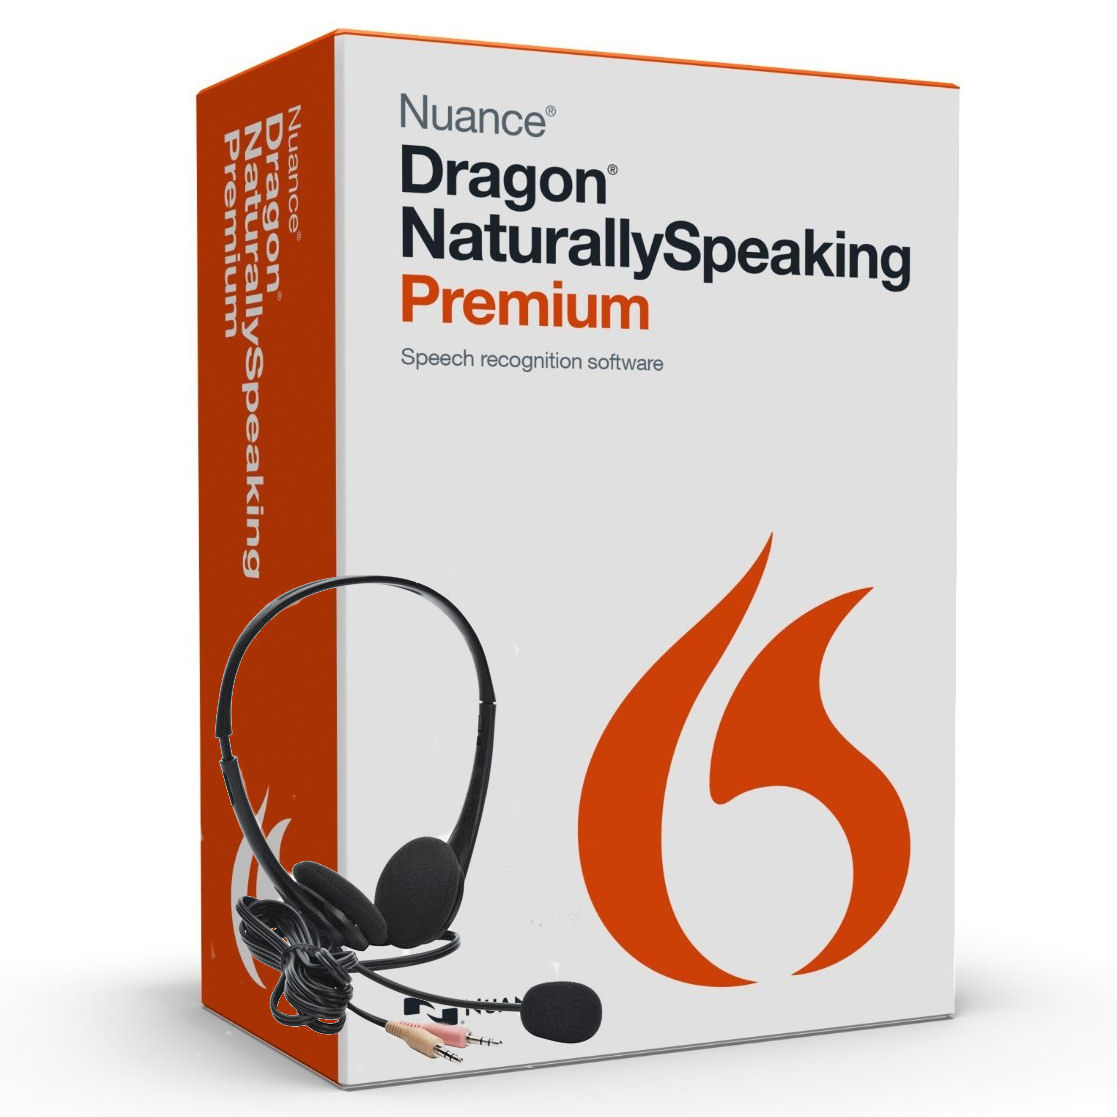 Nuance K609A-F00-13.0 Dragon Naturally Speaking Premium Academic Version 13 Speech Recognition Software